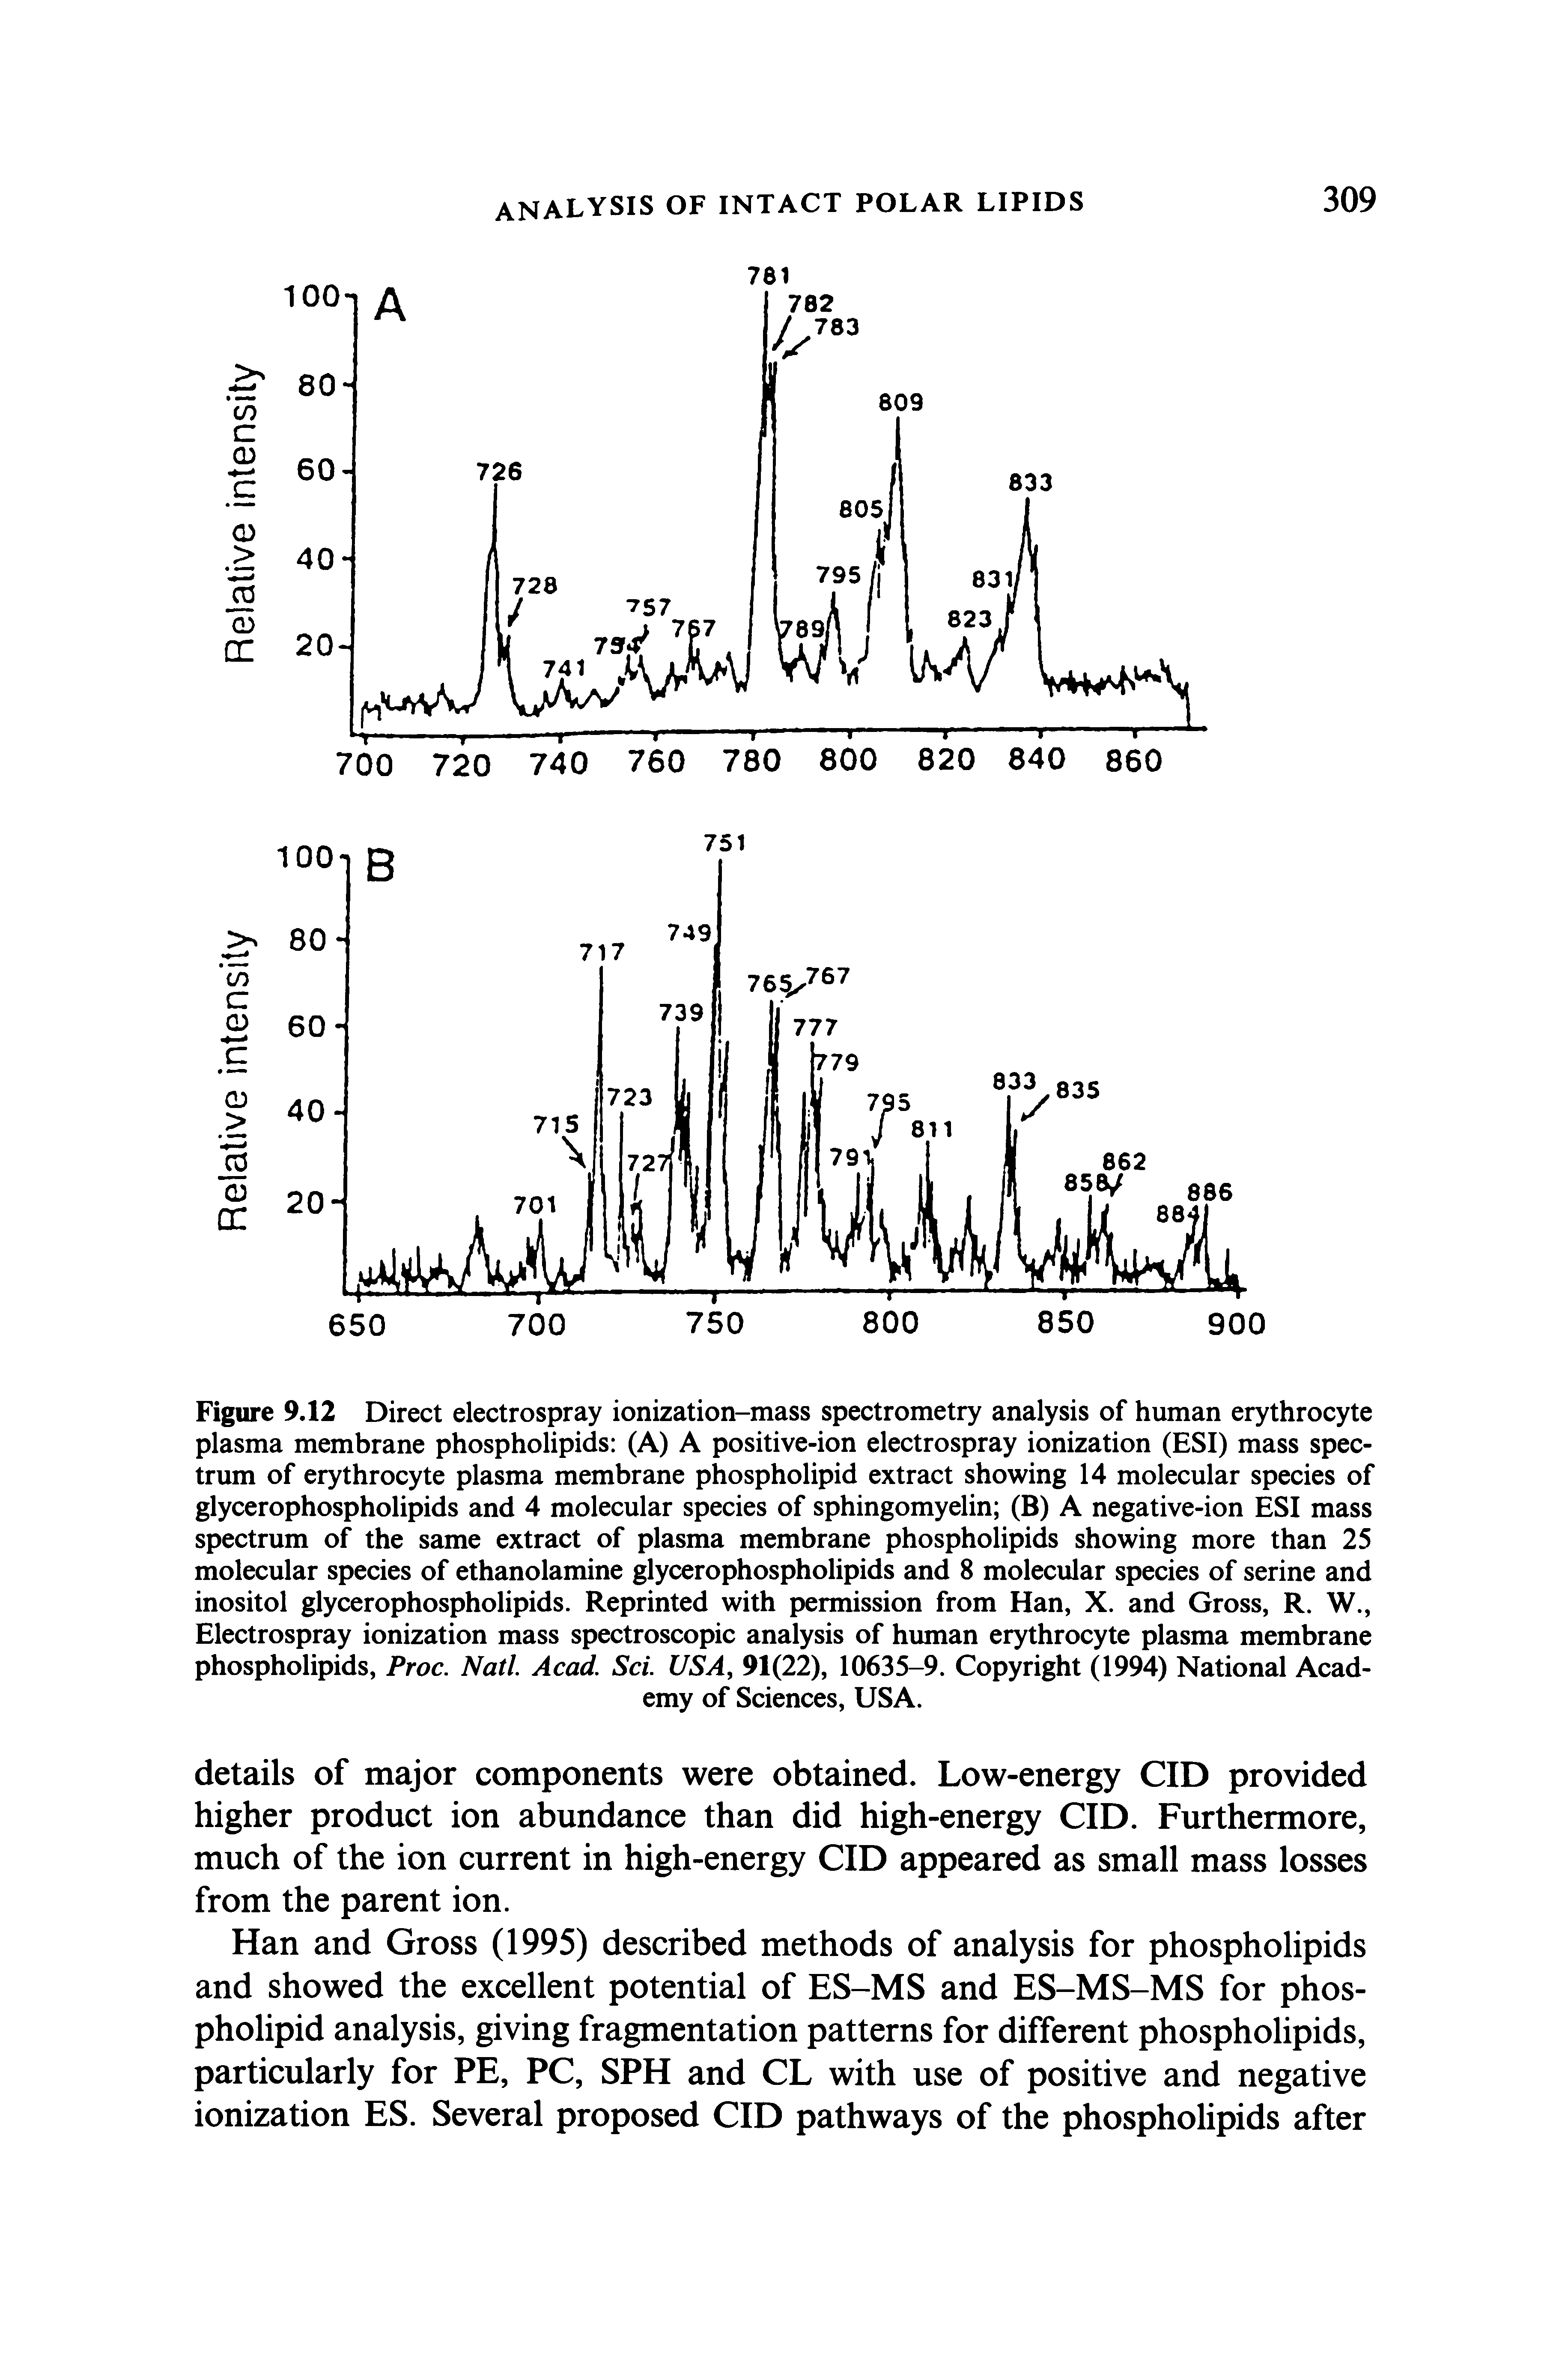 Figure 9.12 Direct electrospray ionization-mass spectrometry analysis of human erythrocyte plasma membrane phospholipids (A) A positive-ion electrospray ionization (ESI) mass spectrum of erythrocyte plasma membrane phospholipid extract showing 14 molecular species of glycerophospholipids and 4 molecular species of sphingomyelin (B) A negative-ion ESI mass spectrum of the same extract of plasma membrane phospholipids showing more than 25 molecular species of ethanolamine glycerophospholipids and 8 molecular species of serine and inositol glycerophospholipids. Reprinted with permission from Han, X. and Gross, R. W., Electrospray ionization mass spectroscopic analysis of human erythrocyte plasma membrane phospholipids, Proc. Natl Acad. Scl USA, 91(22), 10635-9. Copyright (1994) National Academy of Sciences, USA.